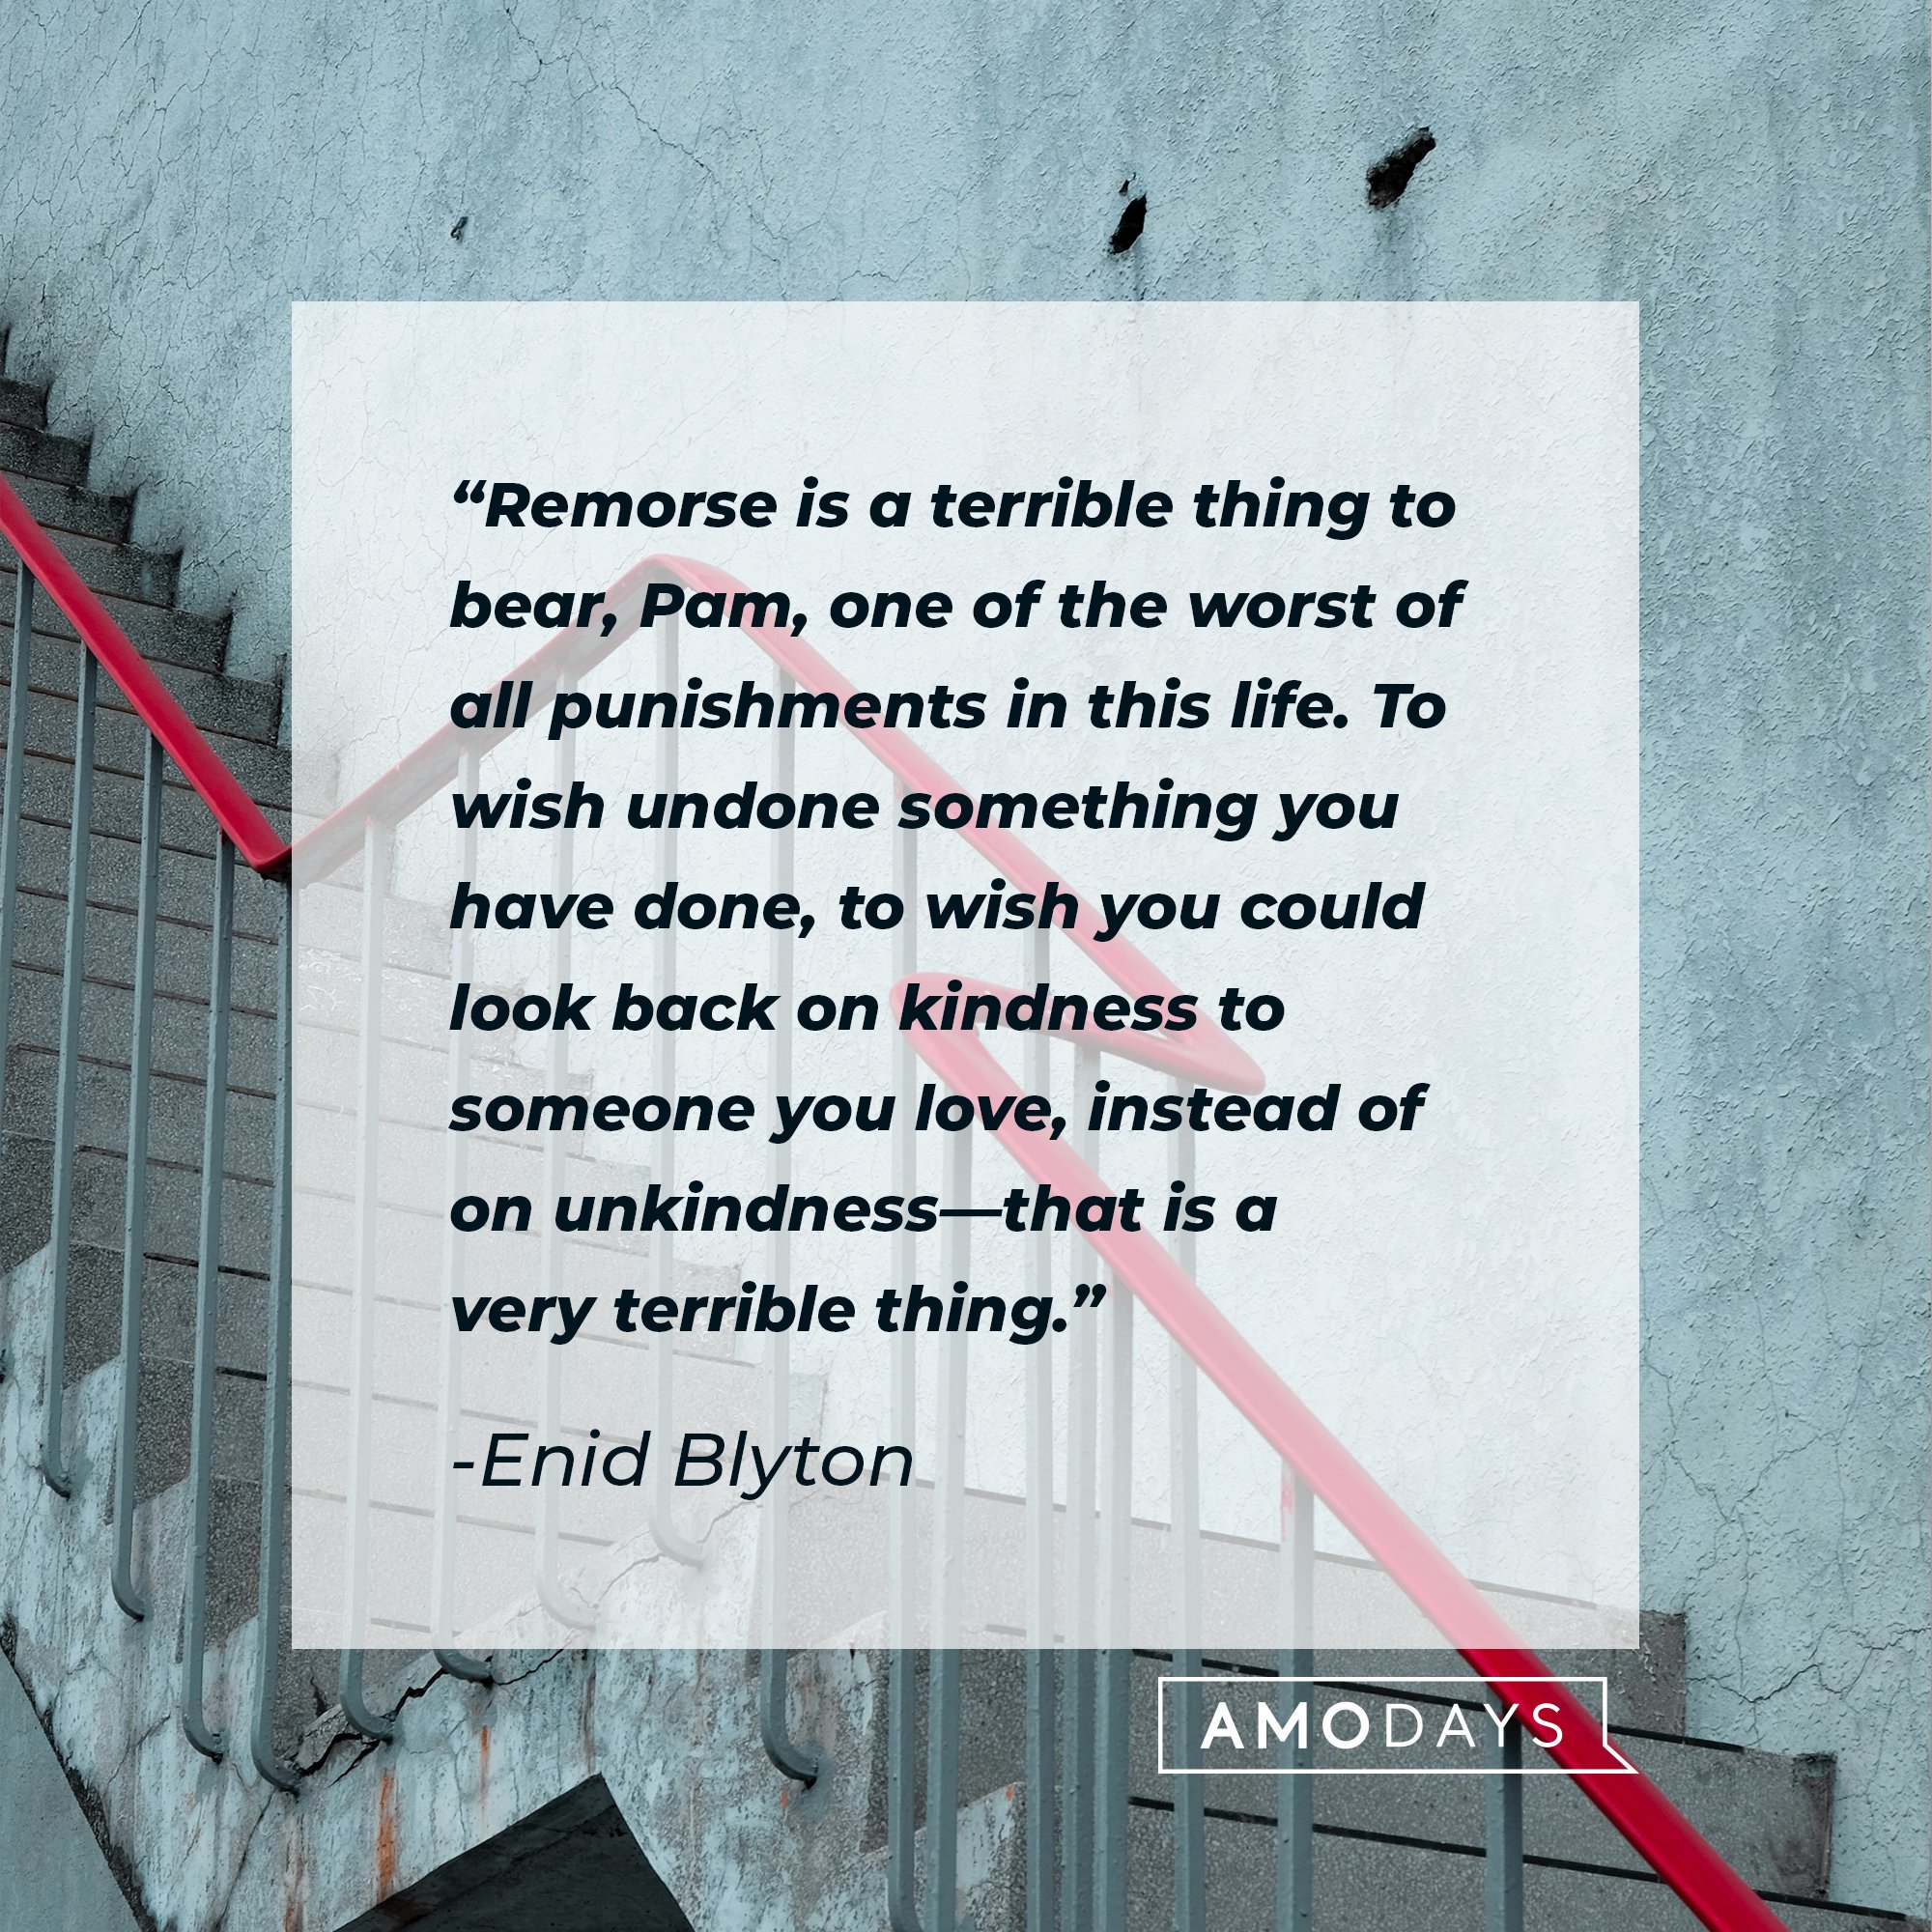   Enid Blyton’s quote: "Remorse is a terrible thing to bear, Pam, one of the worst of all punishments in this life. To wish undone something you have done, to wish you could look back on kindness to someone you love, instead of on unkindness—that is a very terrible thing." | Image: AmoDays